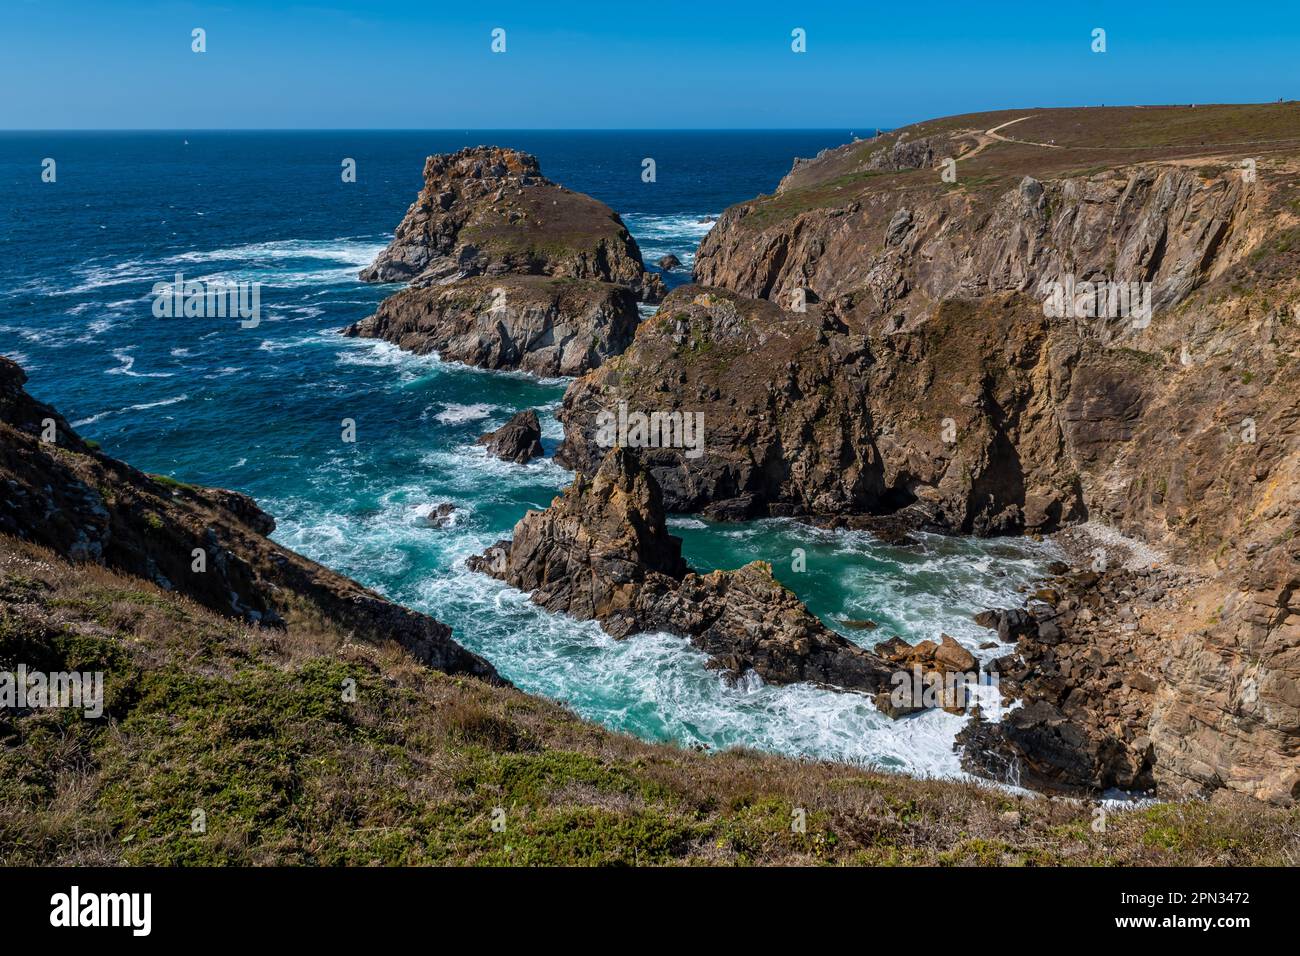 Spectacular Cliffs At Peninsula Pointe Du Van On Cap Sizun At The Finistere Atlantic Coast In Brittany, France Stock Photo